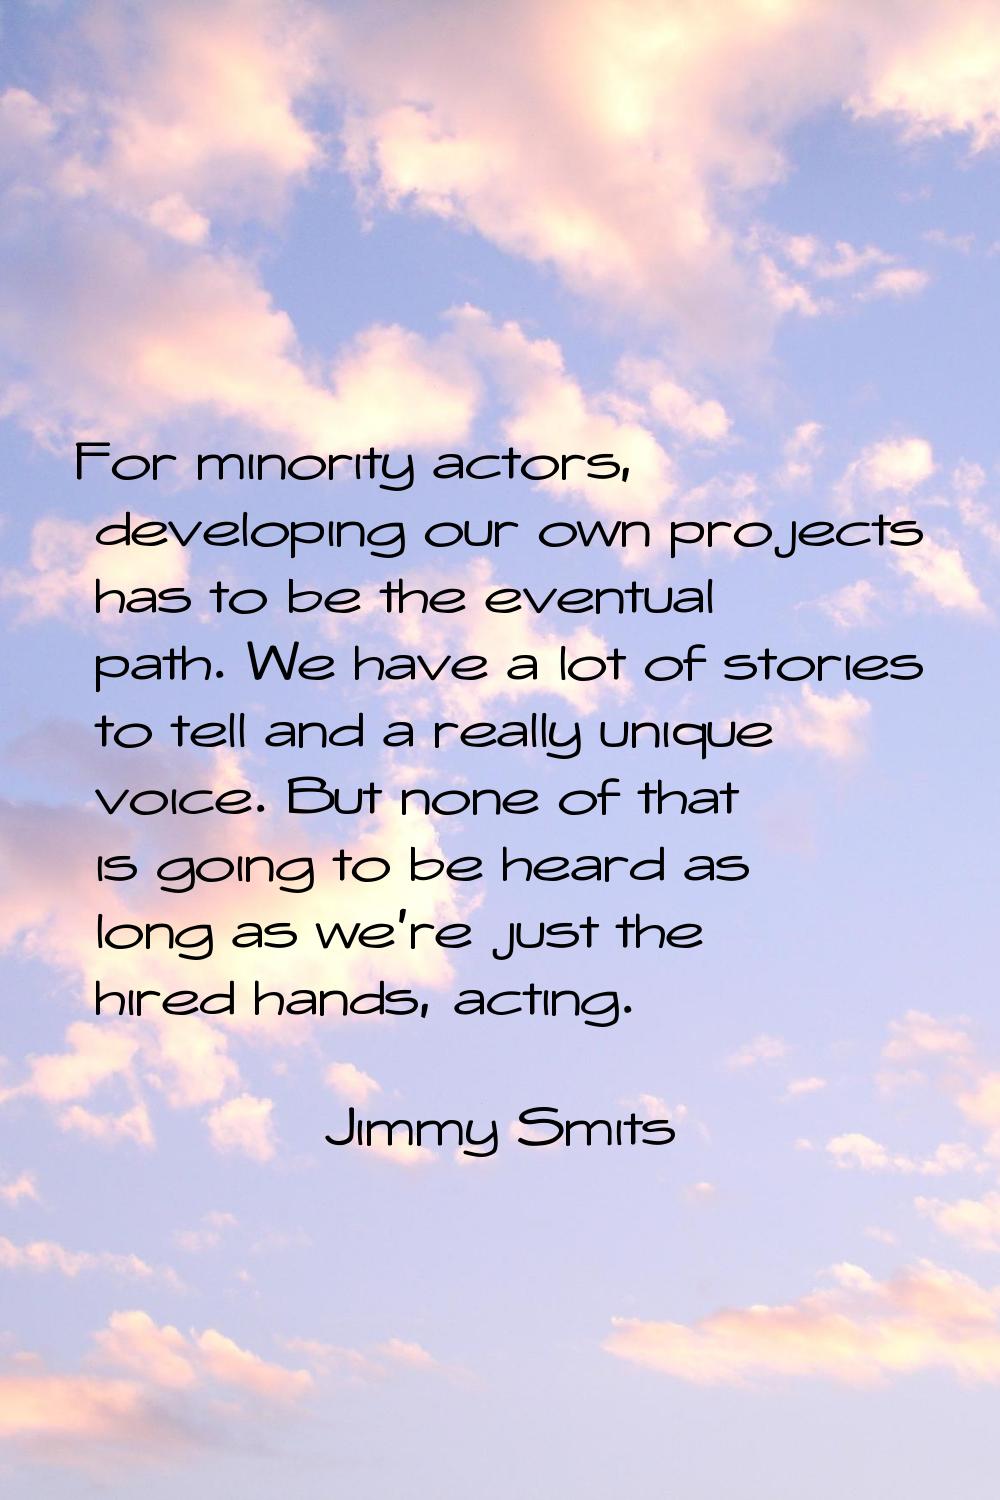 For minority actors, developing our own projects has to be the eventual path. We have a lot of stor